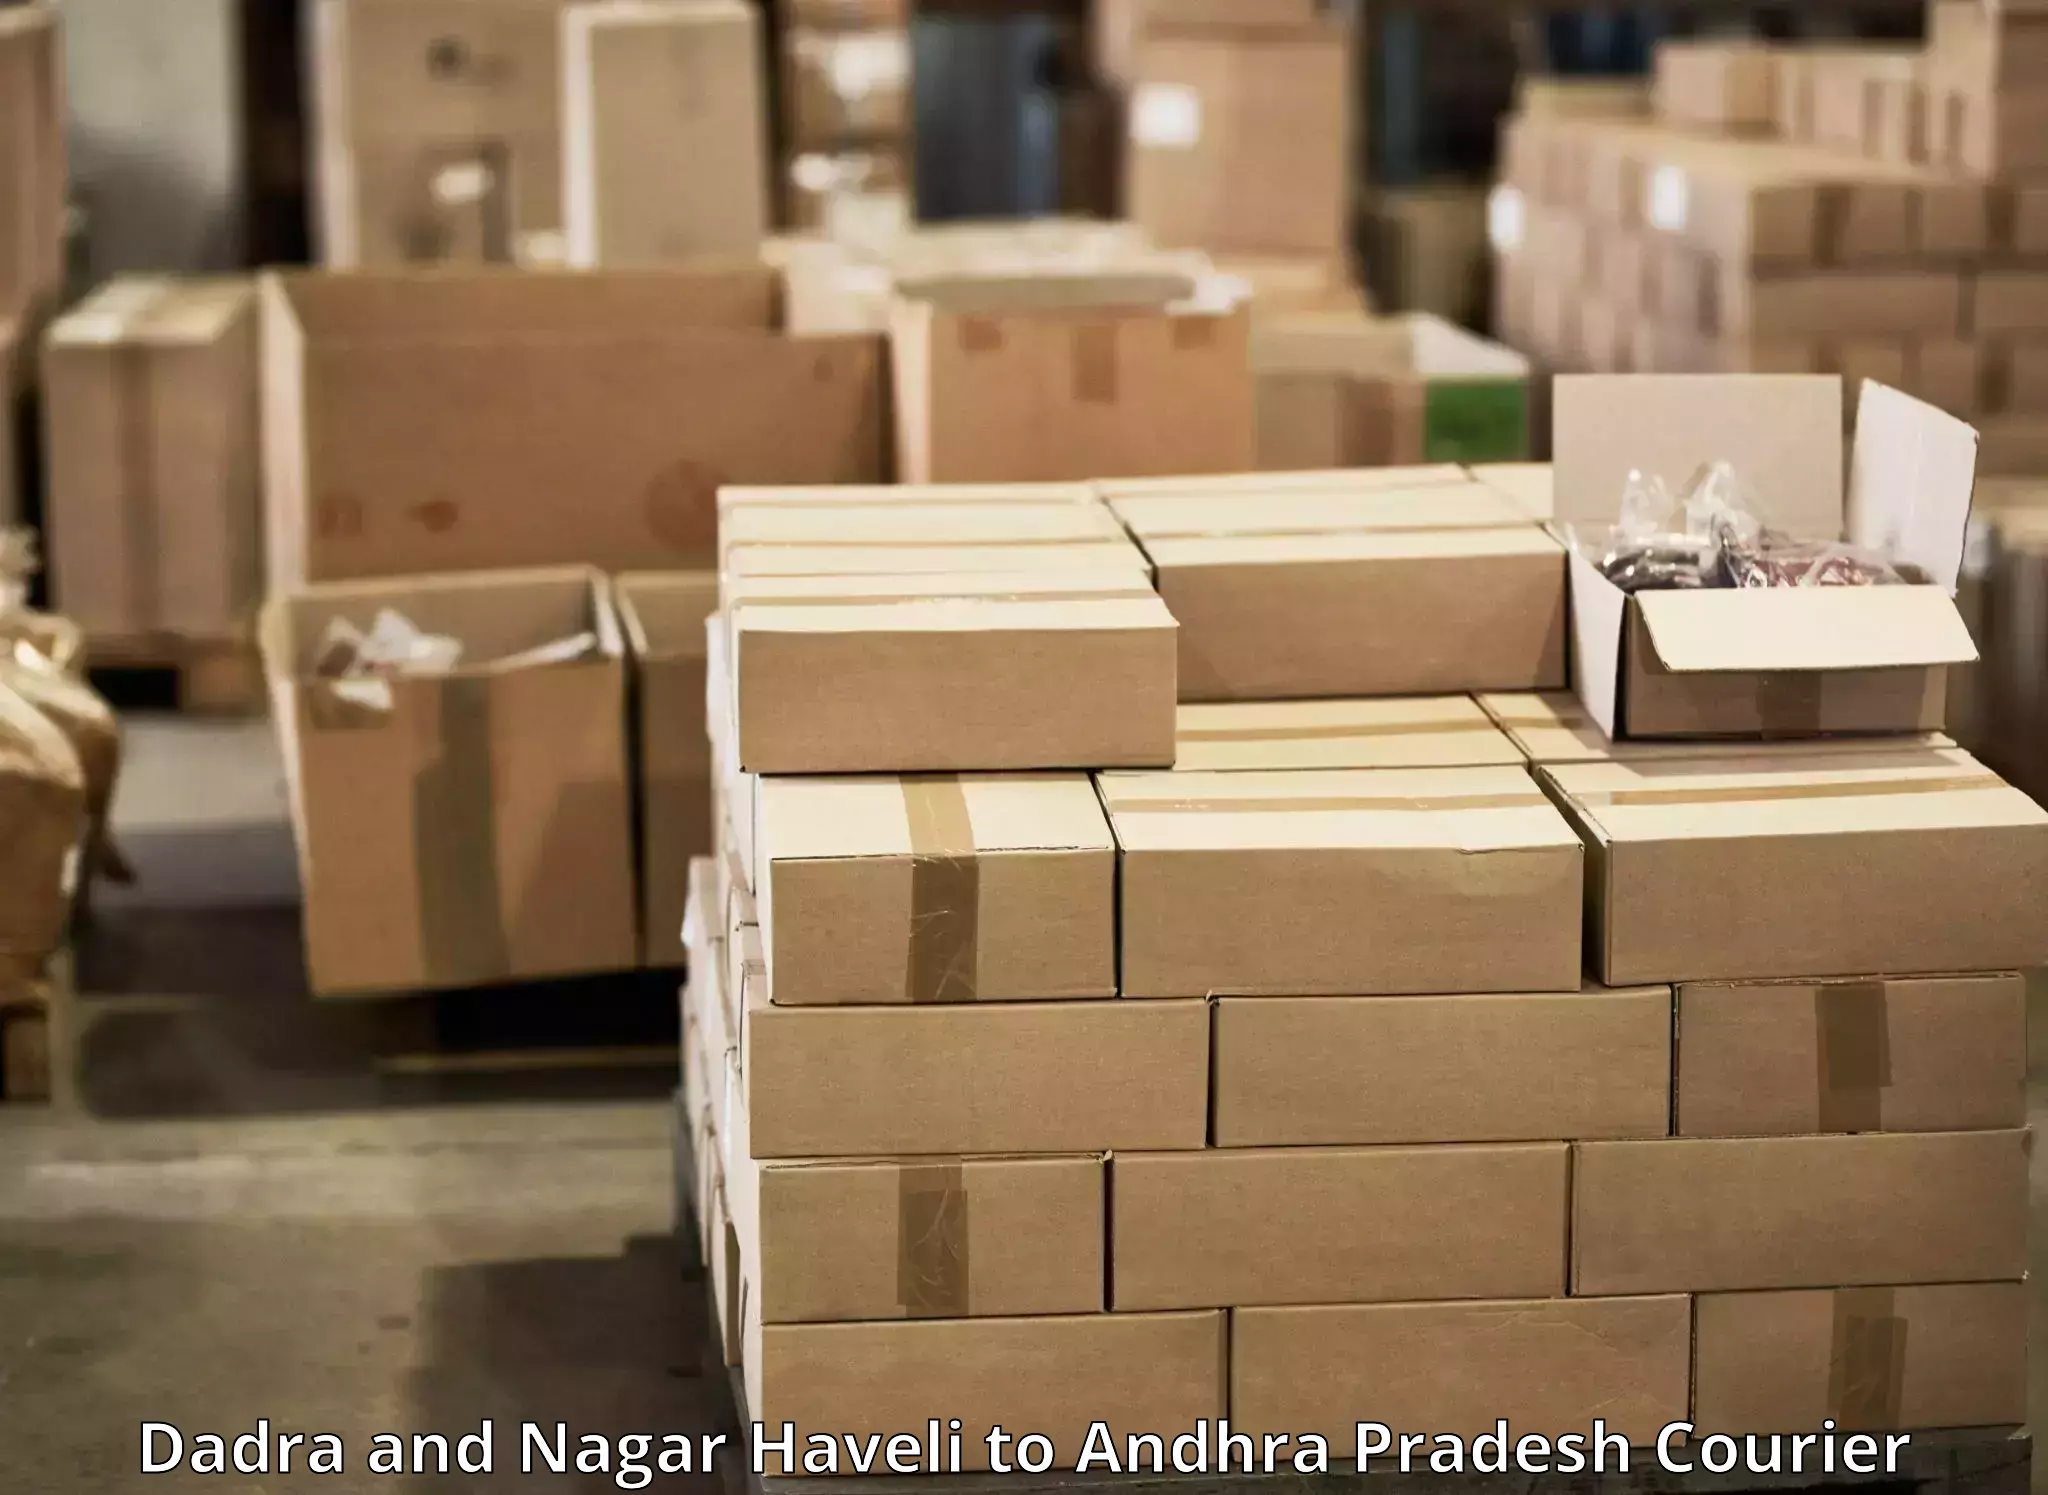 Express delivery network Dadra and Nagar Haveli to Badvel